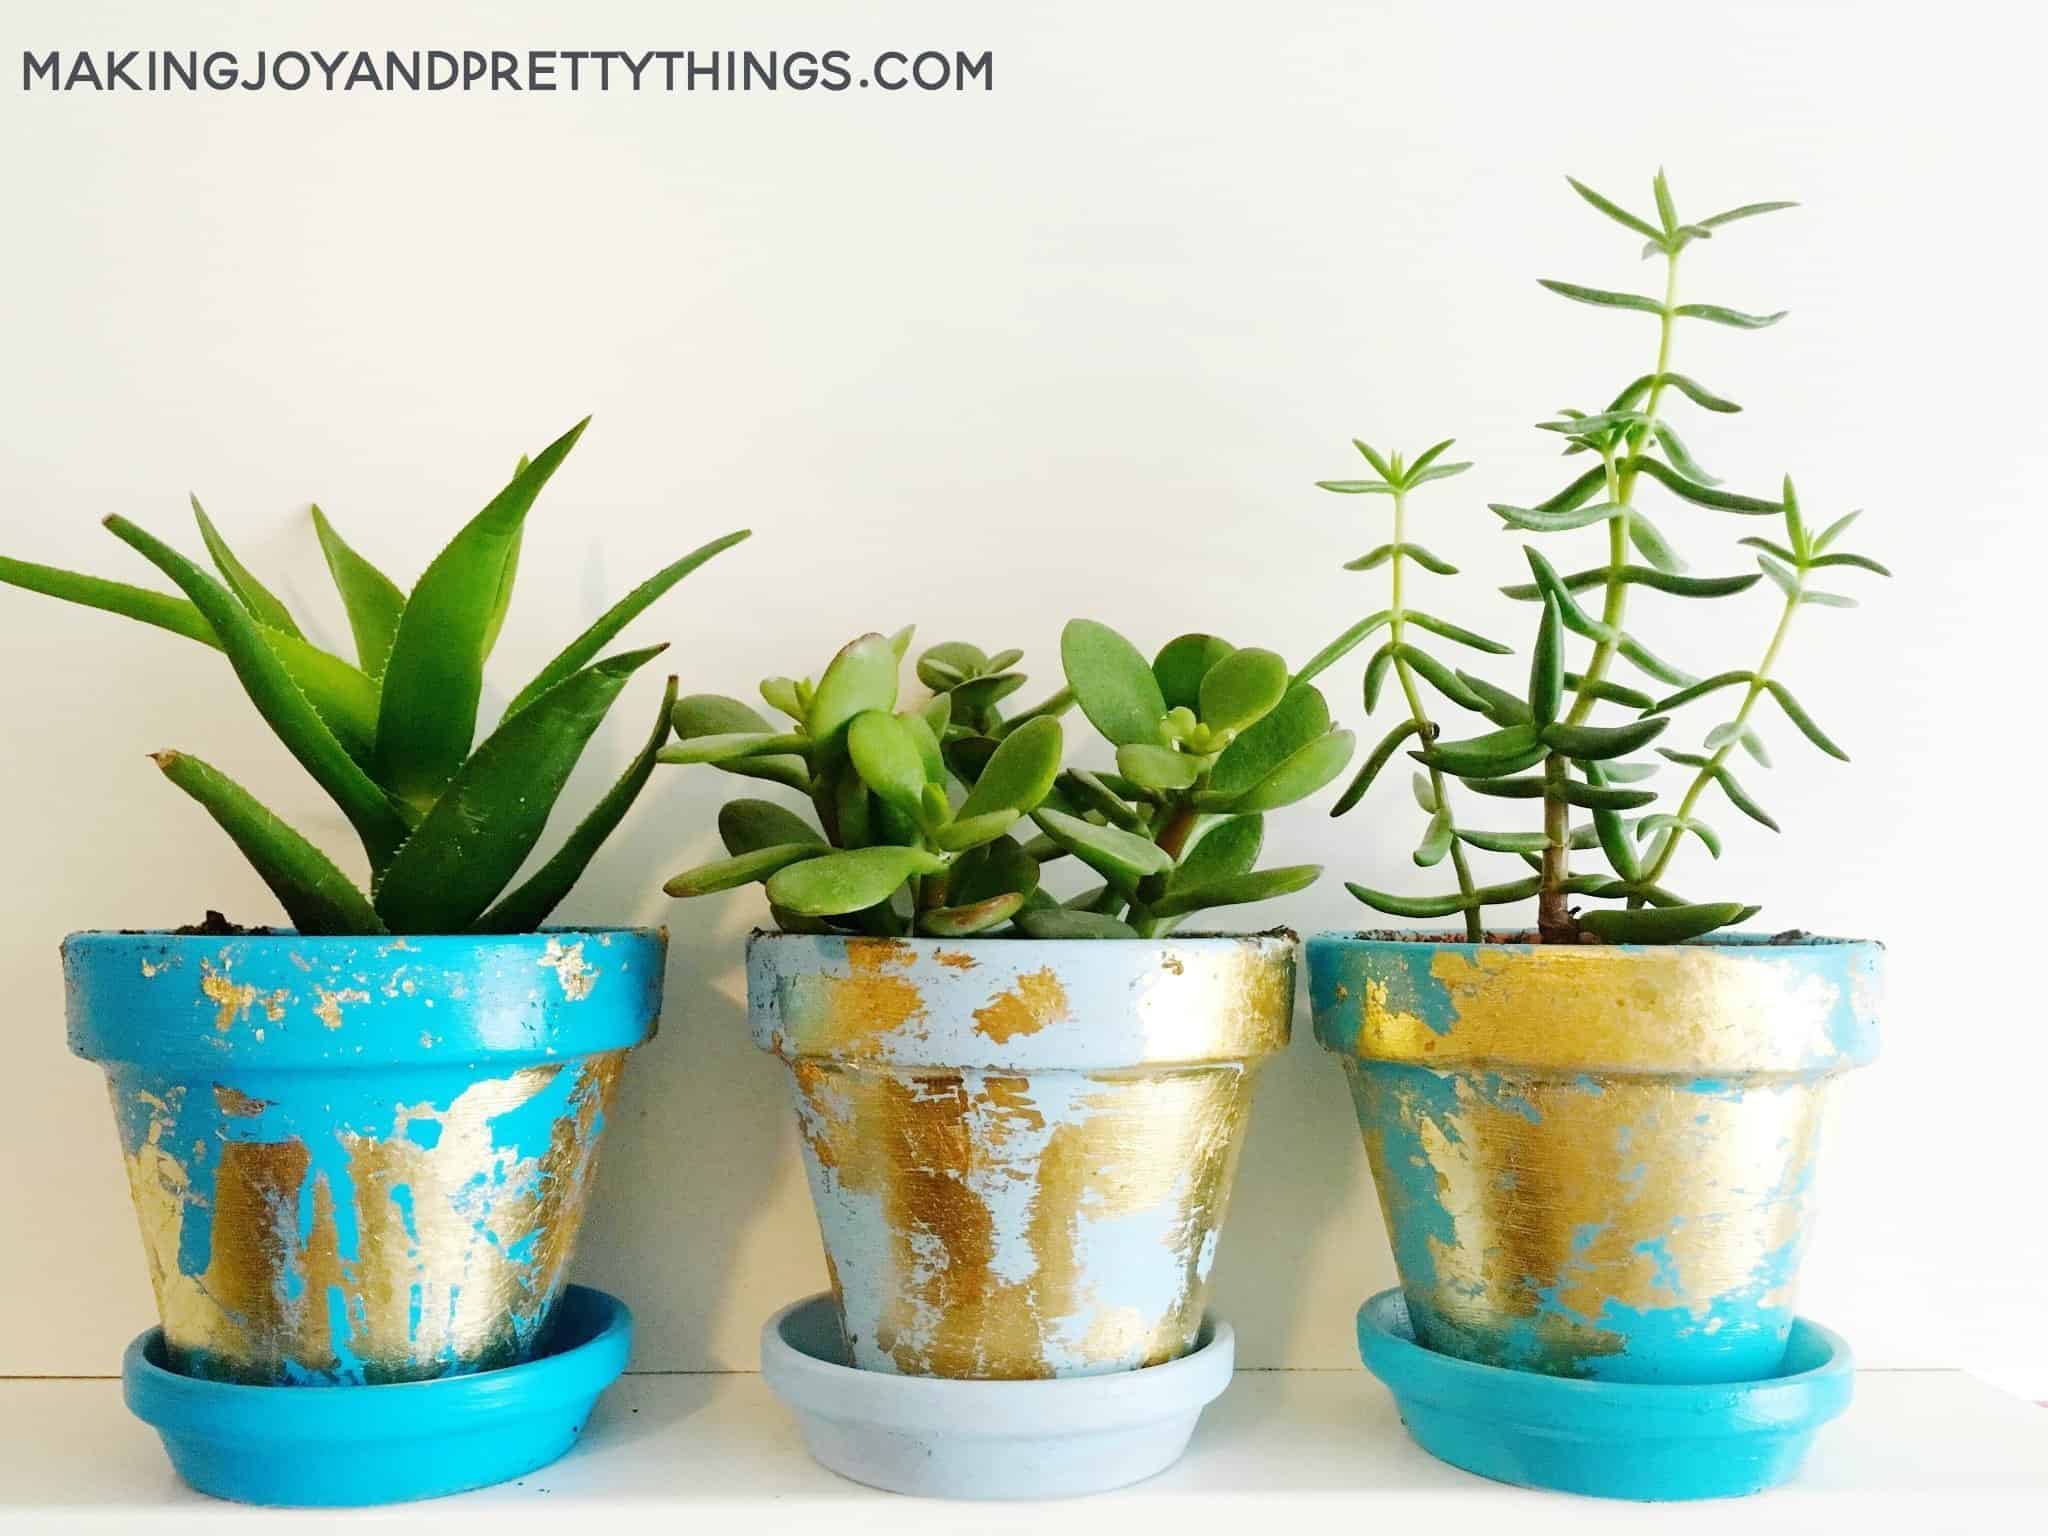 If you are looking for a way to act on those terra cotta pot ideas head over to michaels and follow along to transform them.